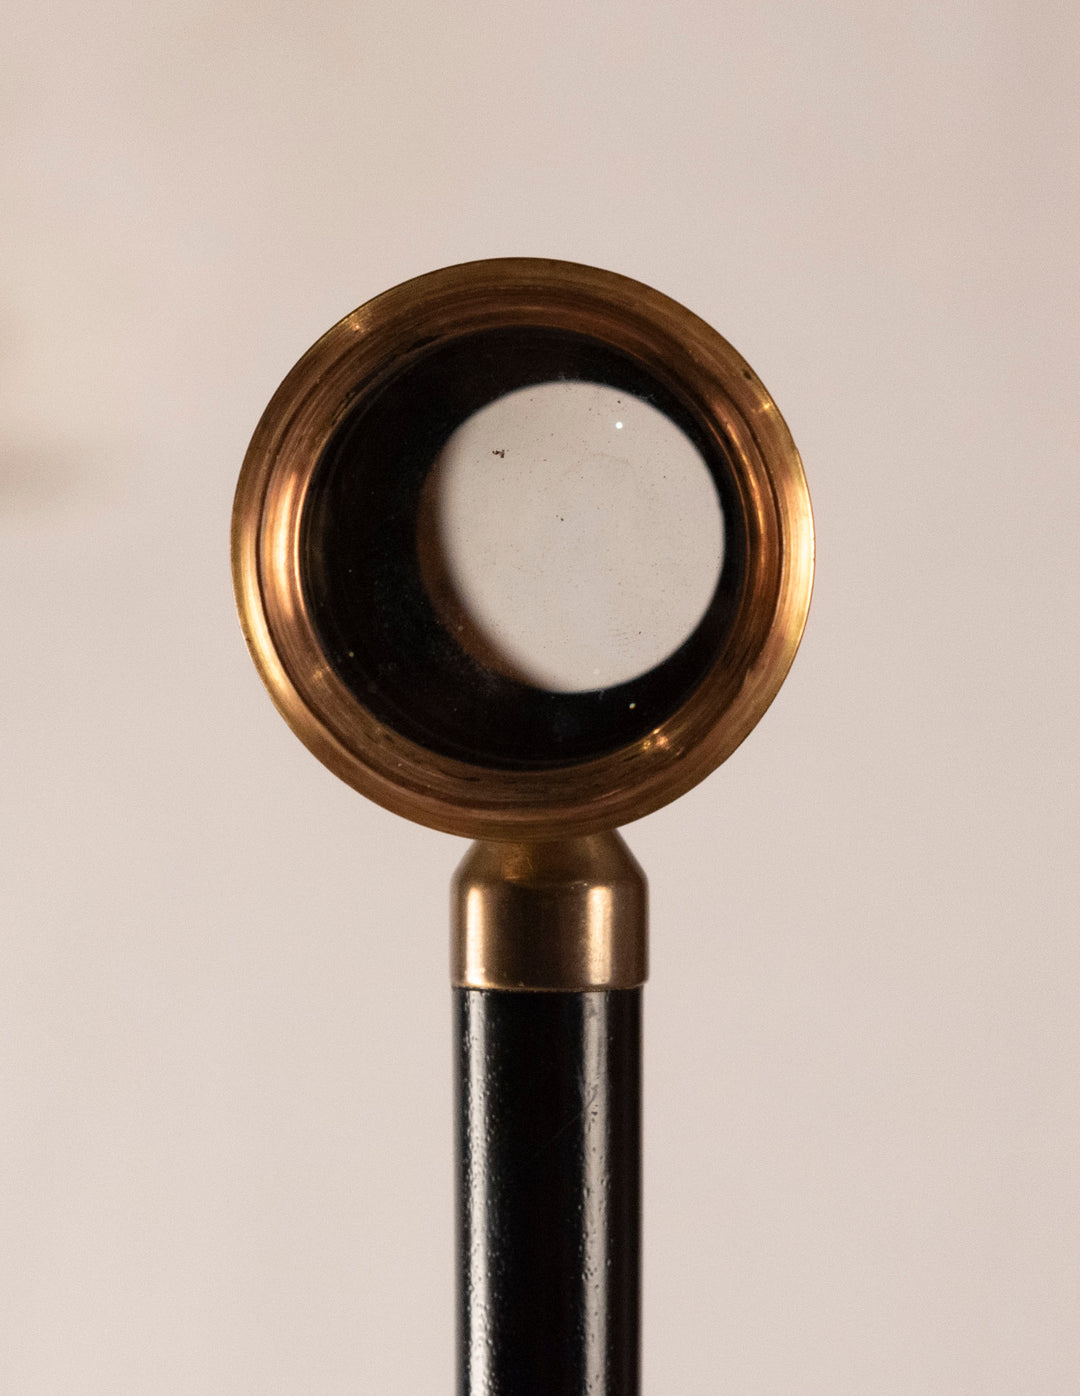 A Gilt Mother of Pearl and Ebony Walking Stick with Spy Glass (c. 1910)